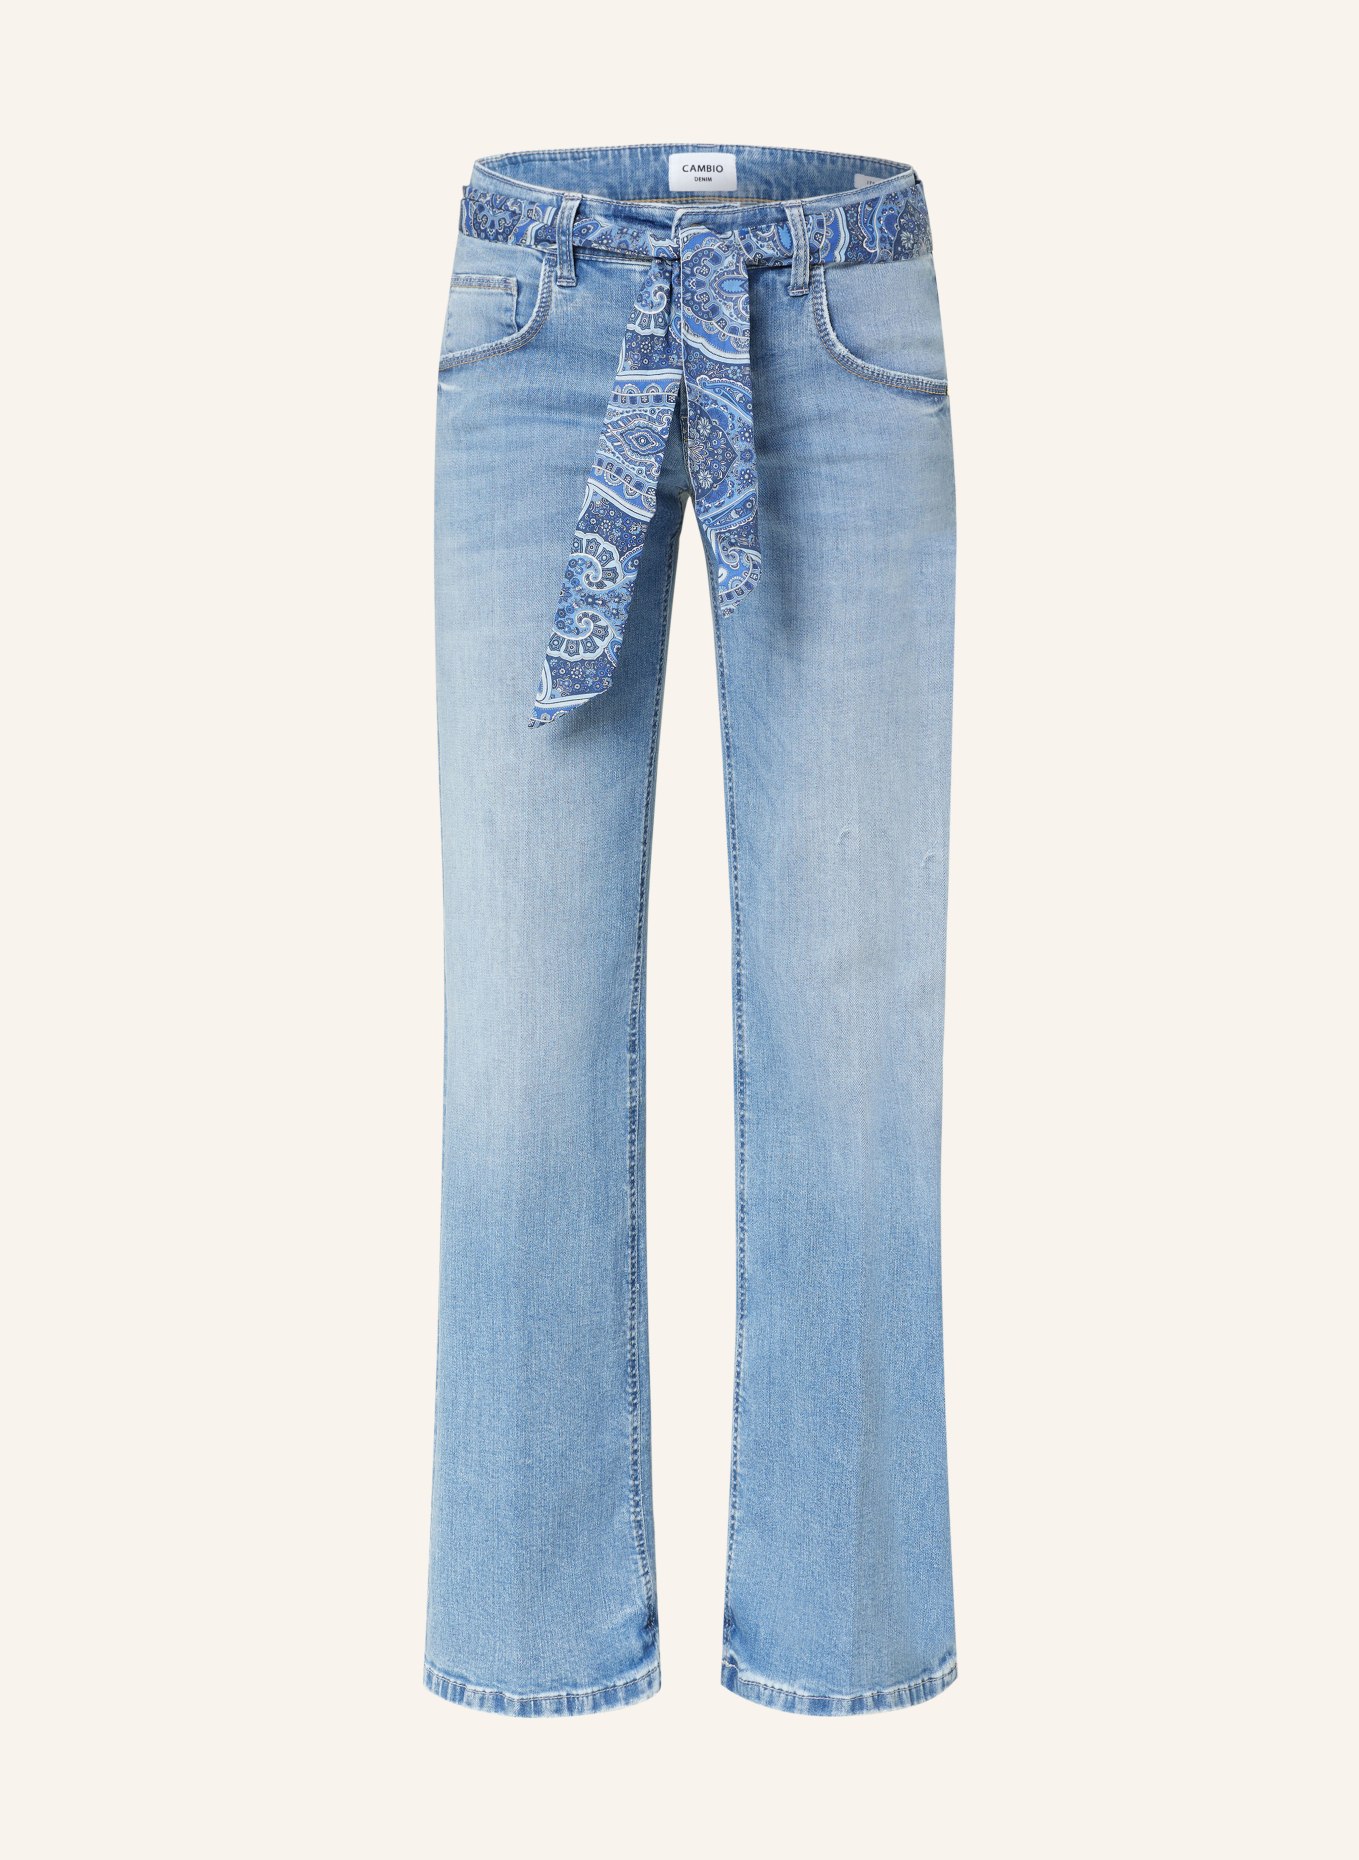 CAMBIO Flared jeans TESS, Color: 5136 well worn summer used (Image 1)